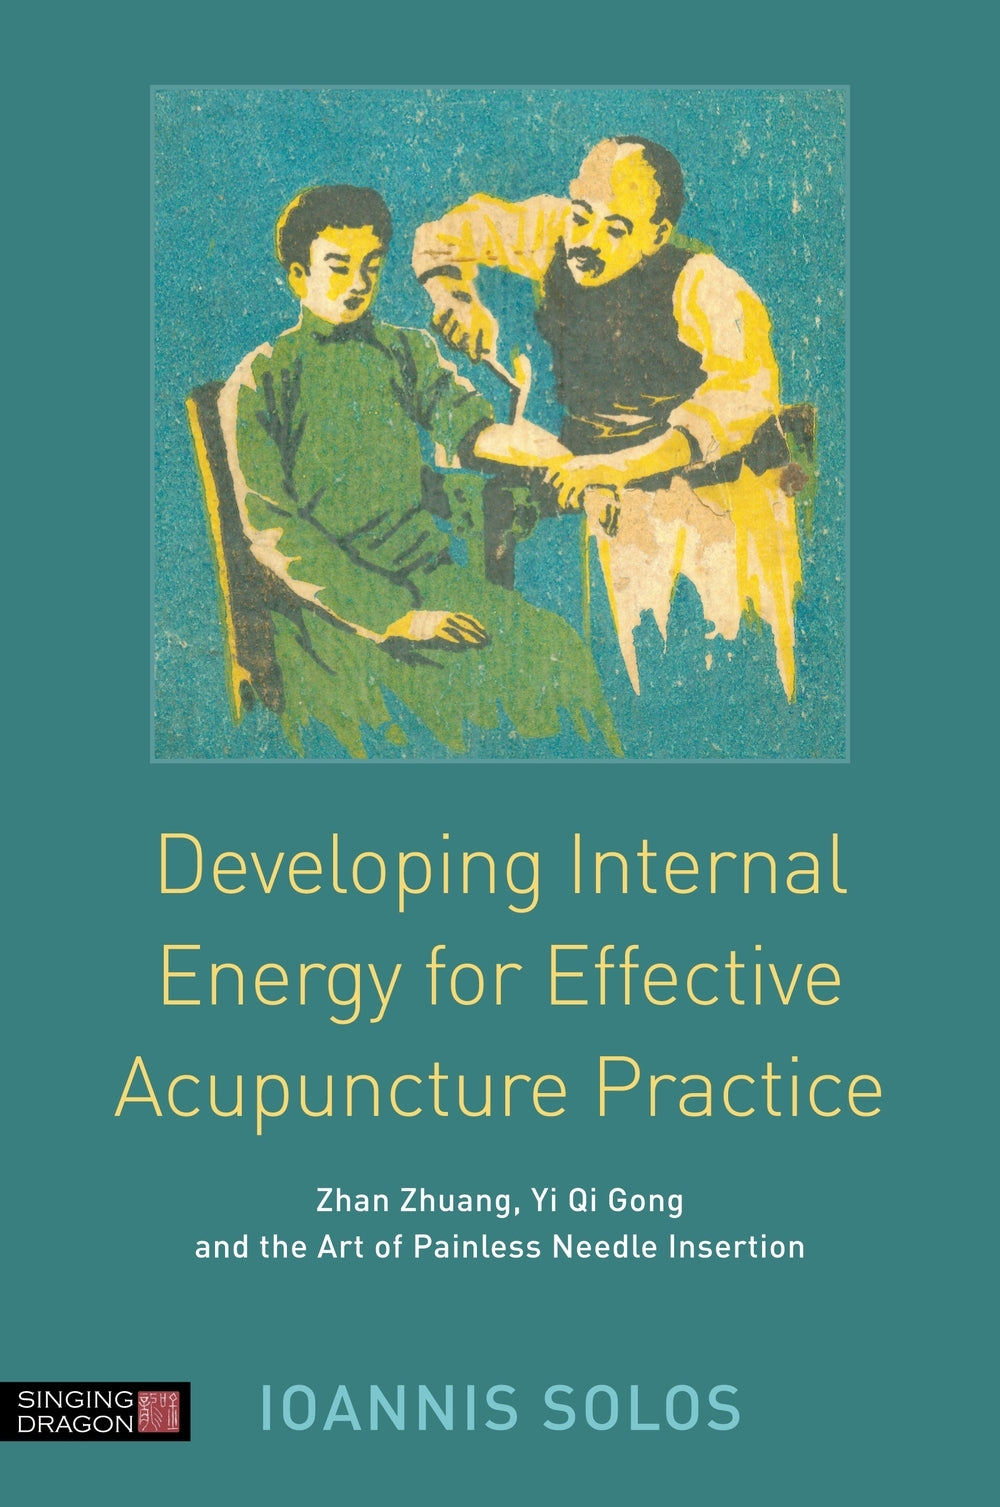 Developing Internal Energy for Effective Acupuncture Practice by Ioannis Solos